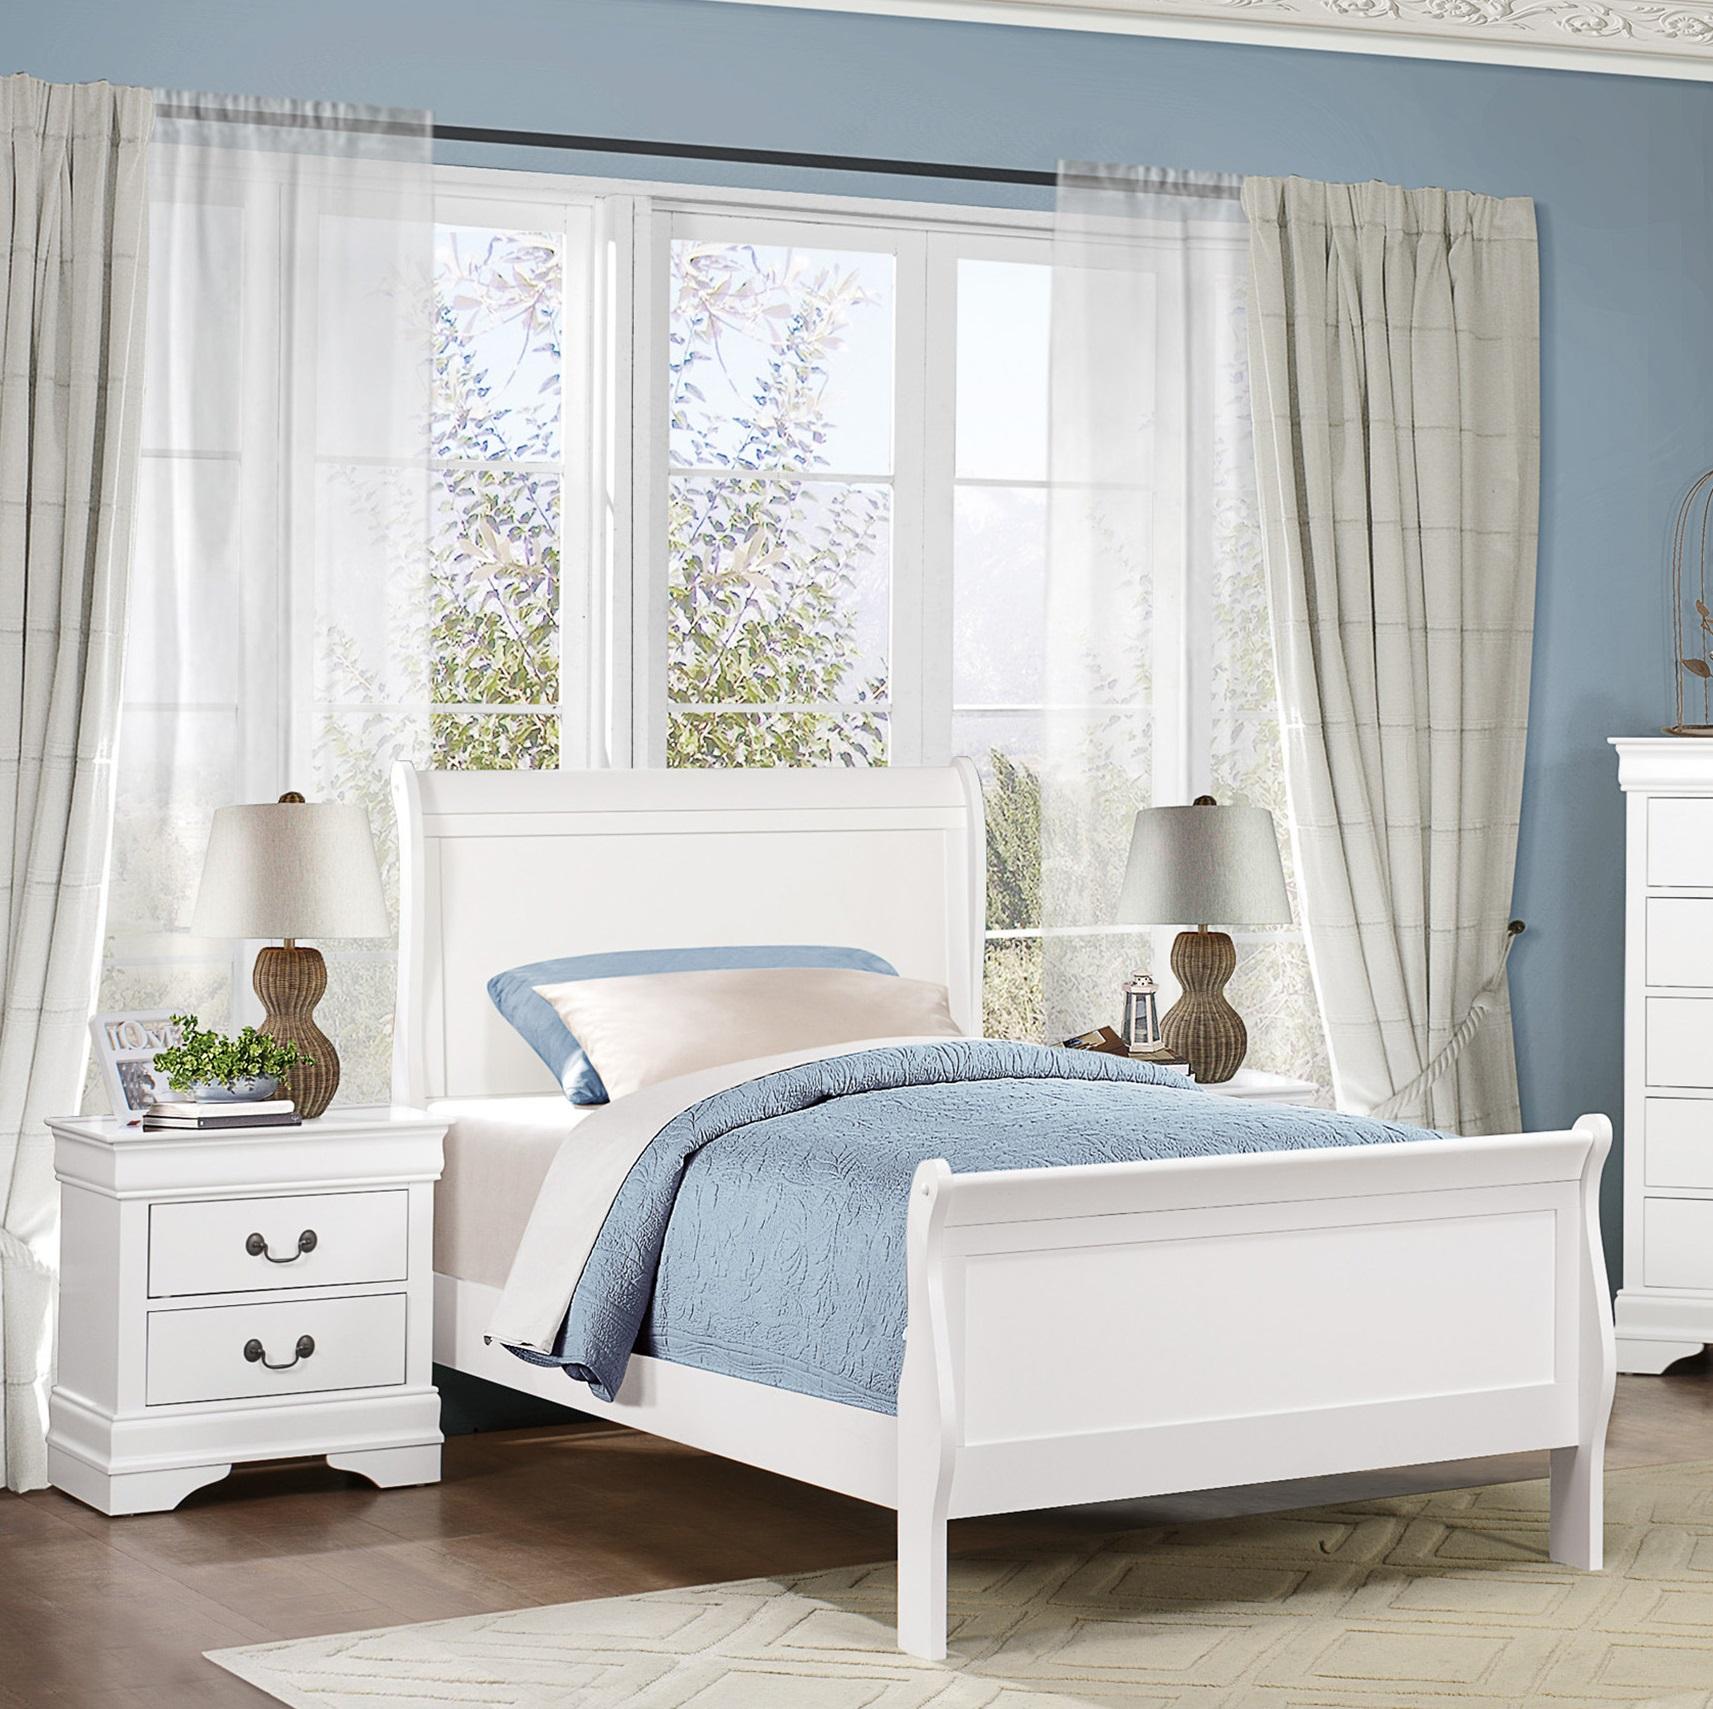 Traditional Bedroom Set 2147TW-1-3PC Mayville 2147TW-1-3PC in White 